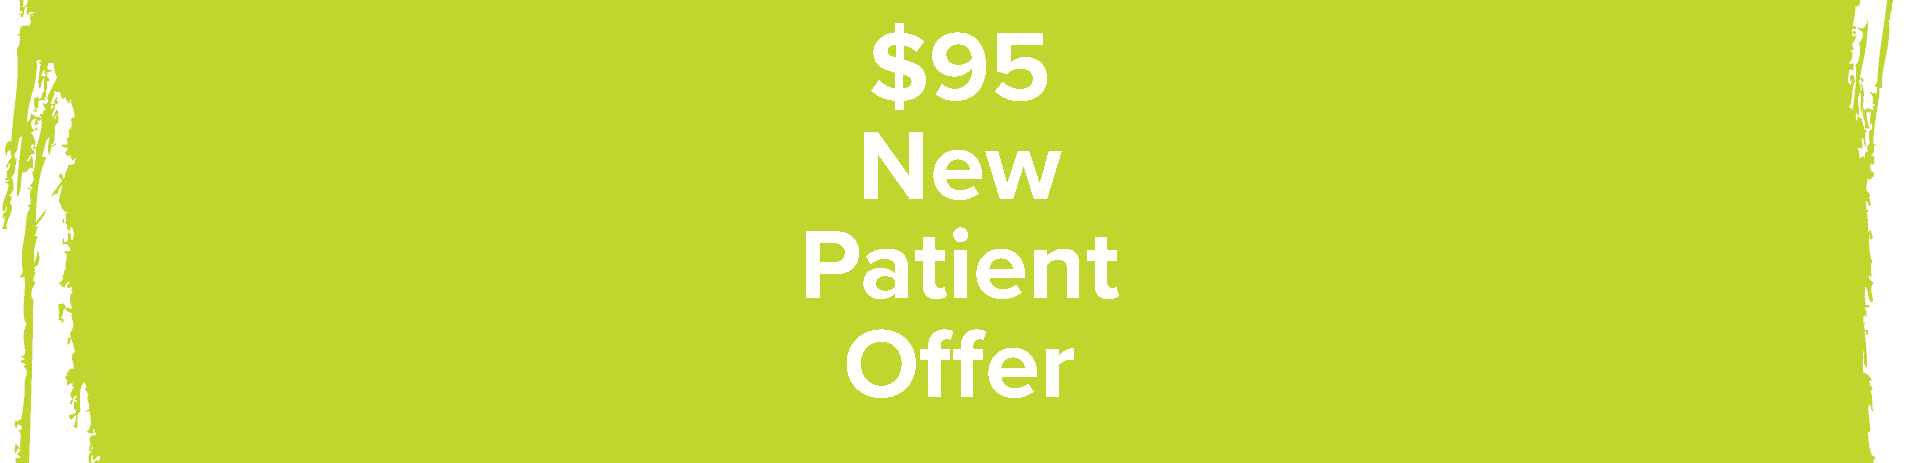 new patient offer banner